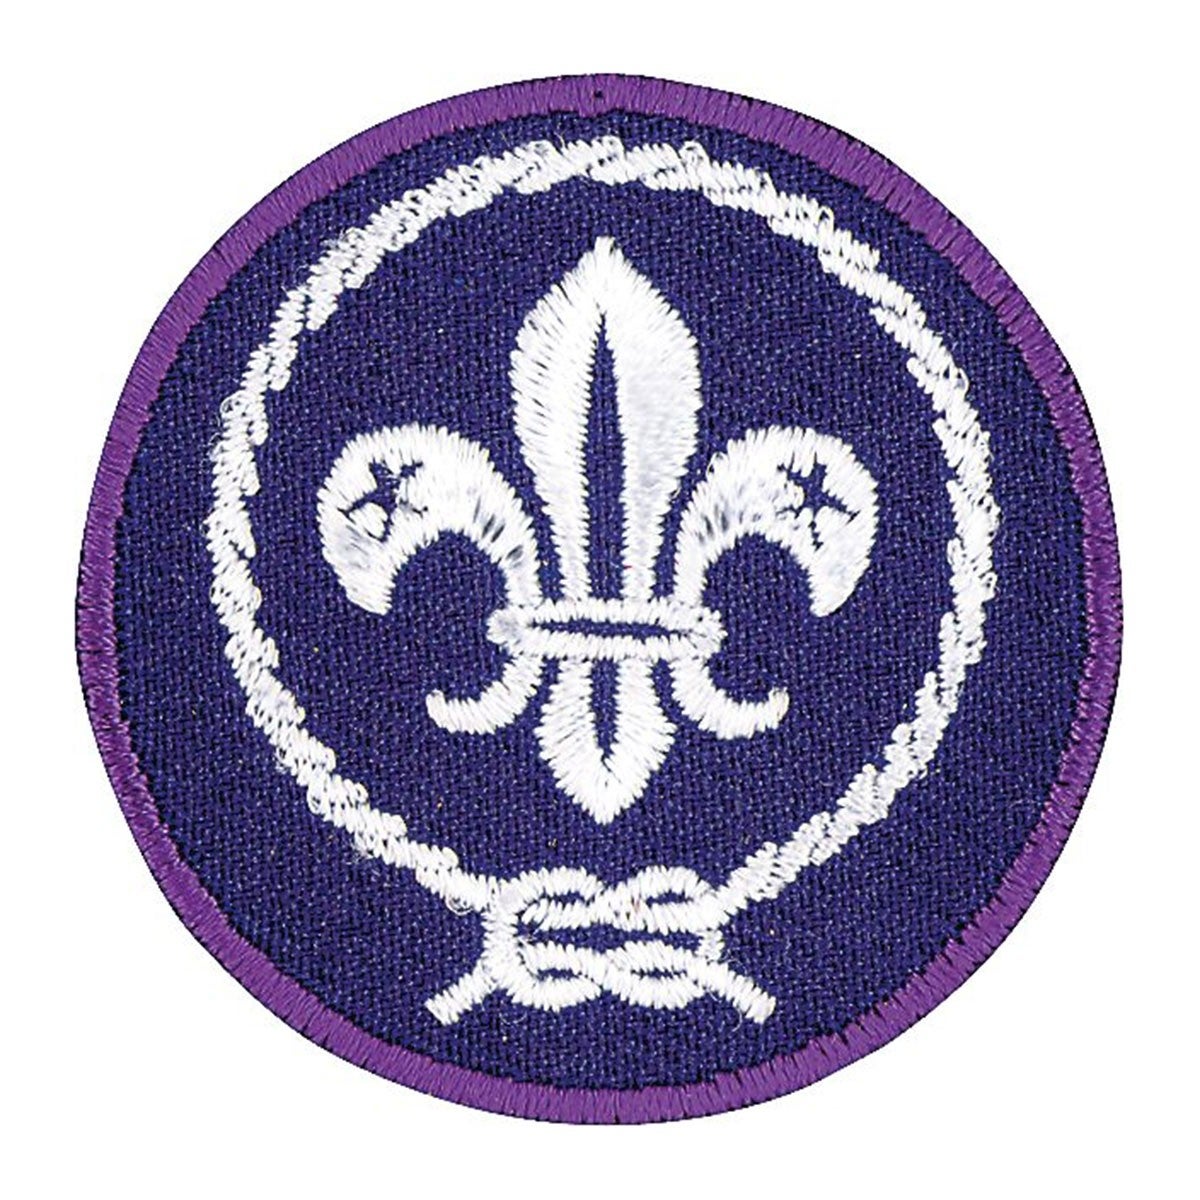 Official BSA Cub Scout Badge Magic Adhesive Patch Kit for Uniform